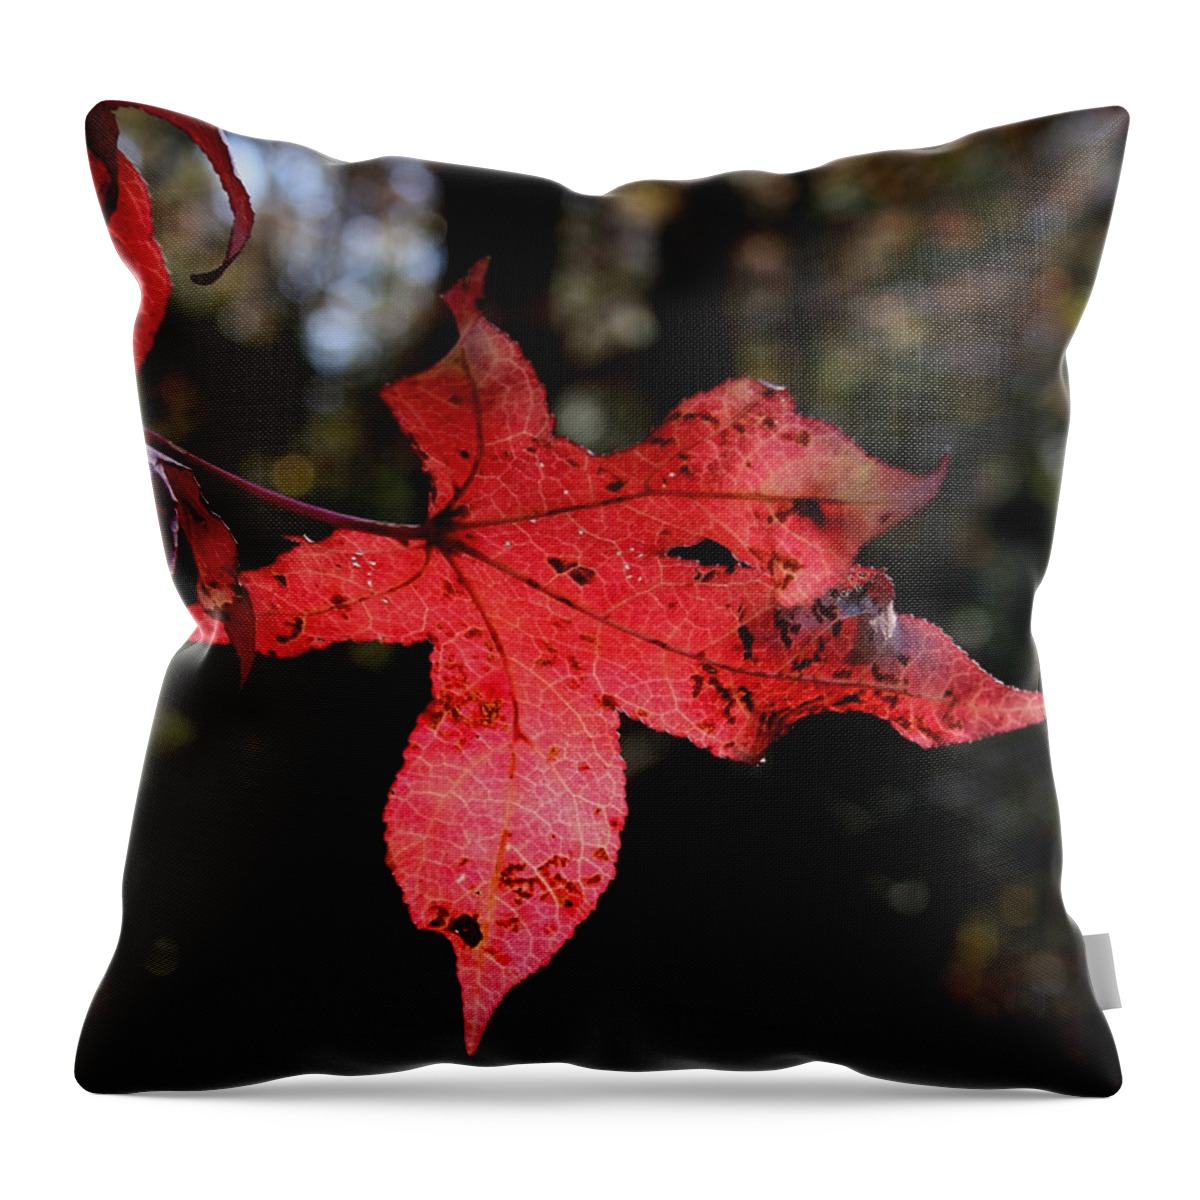 Leaf Throw Pillow featuring the photograph Red Leaf by Karen Harrison Brown